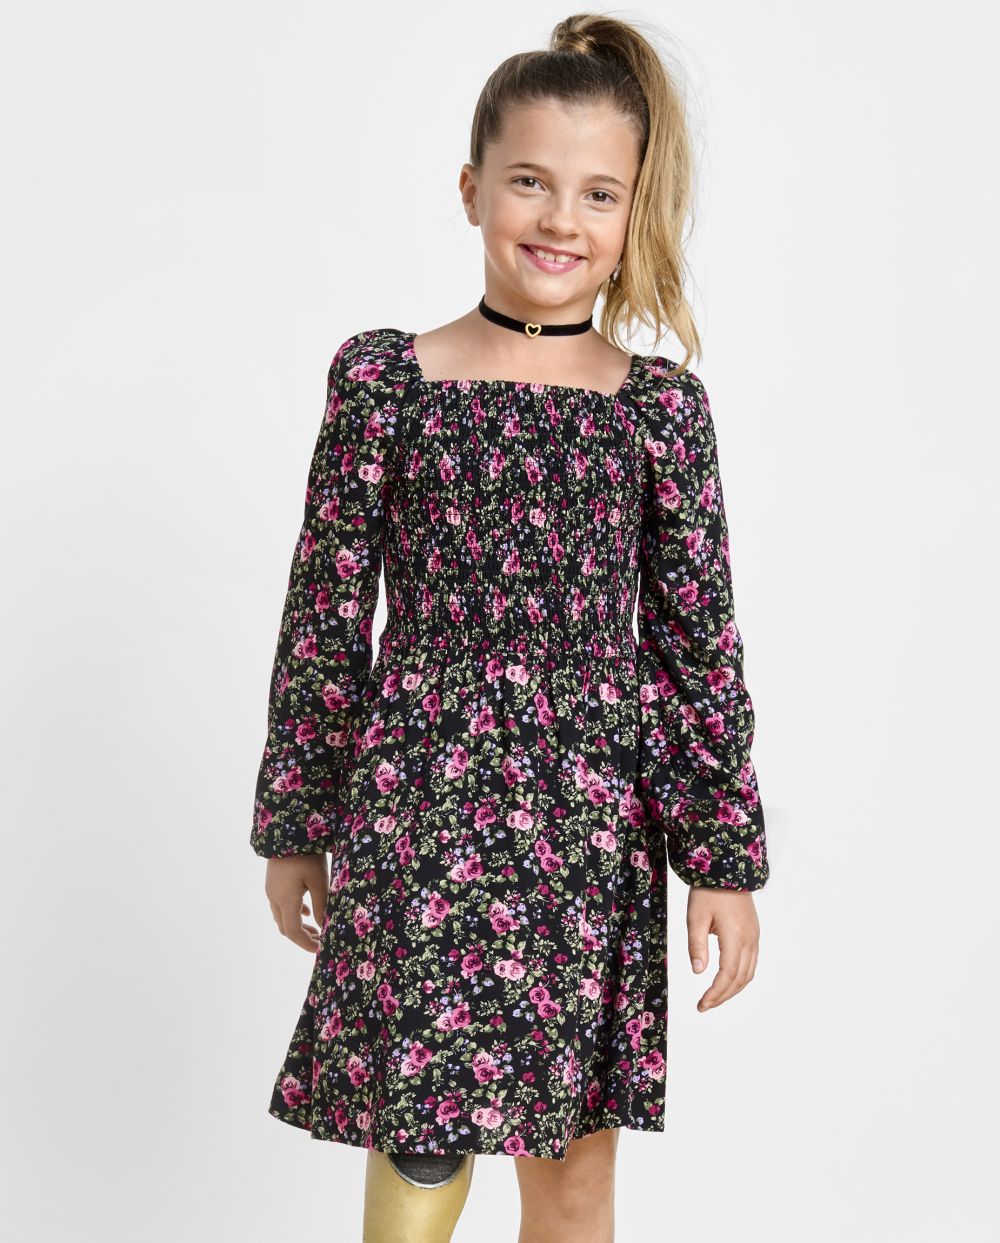 Girls Floral Print Smocked Square Neck Above the Knee Long Sleeves Rayon Dress